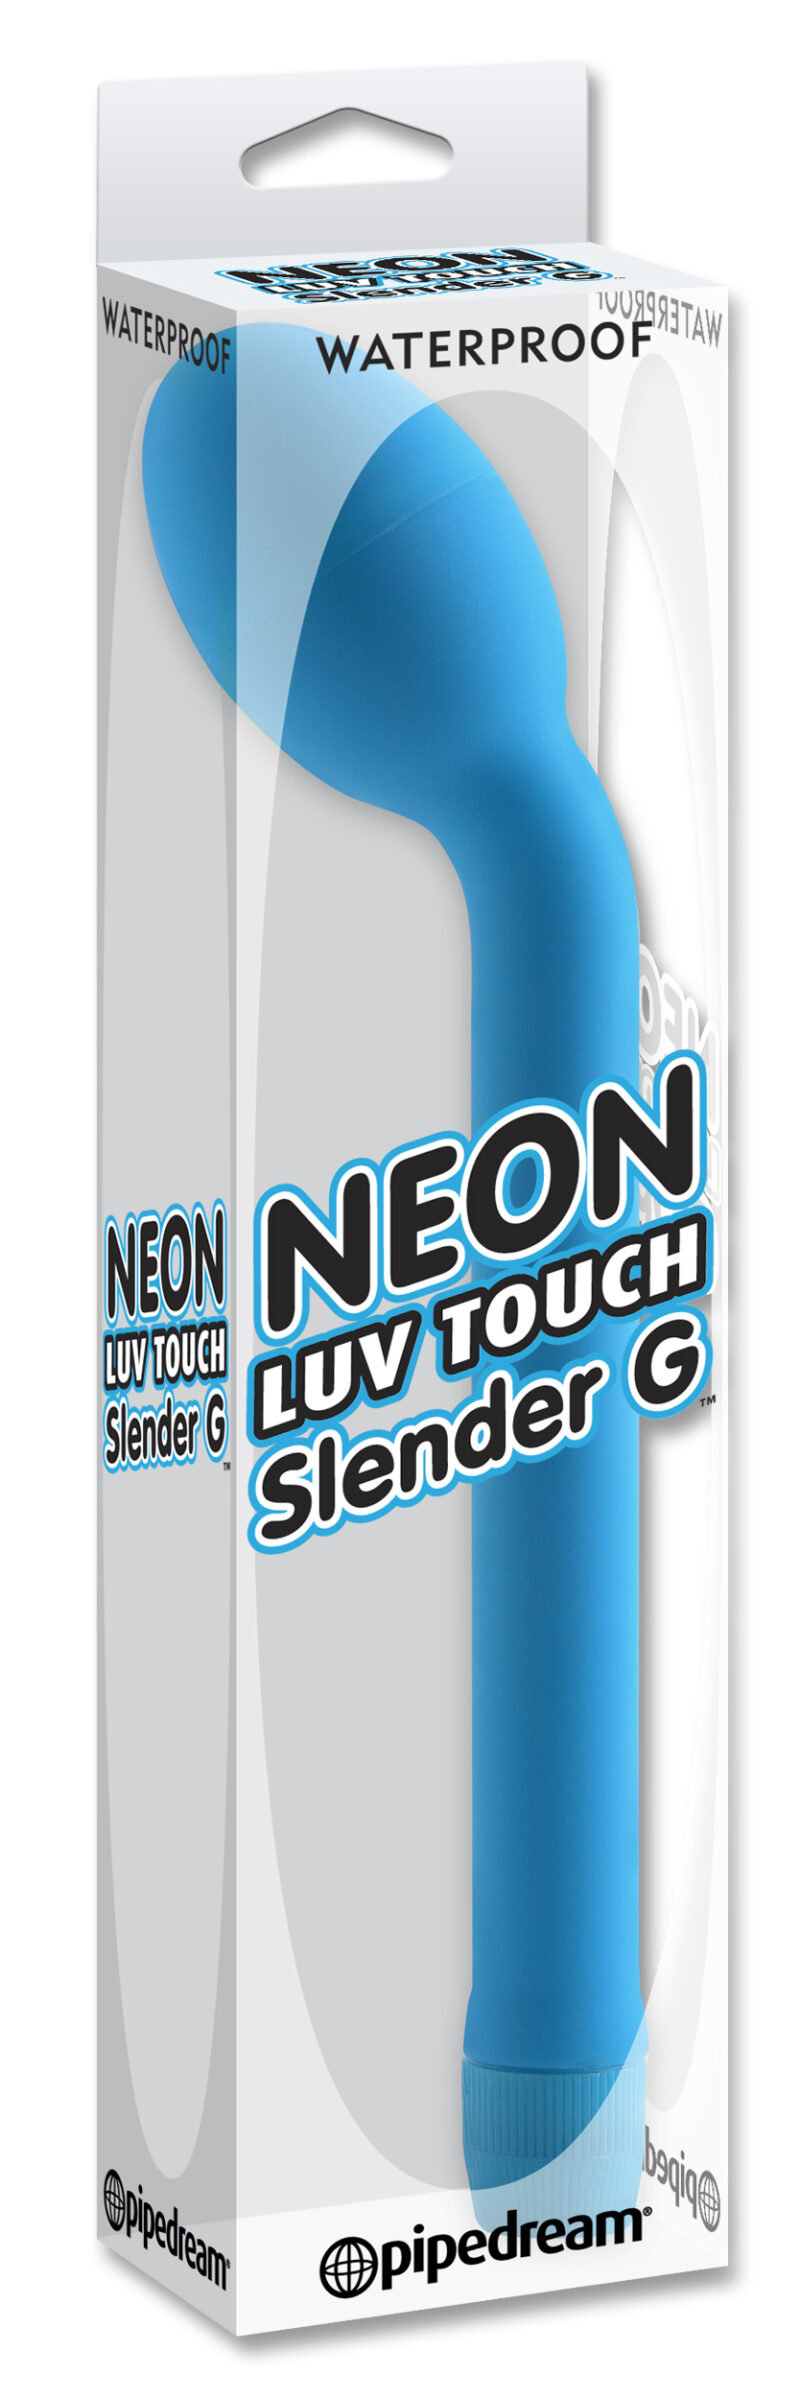 Pipedream Neon Luv Touch Slender G Vibrator Blue